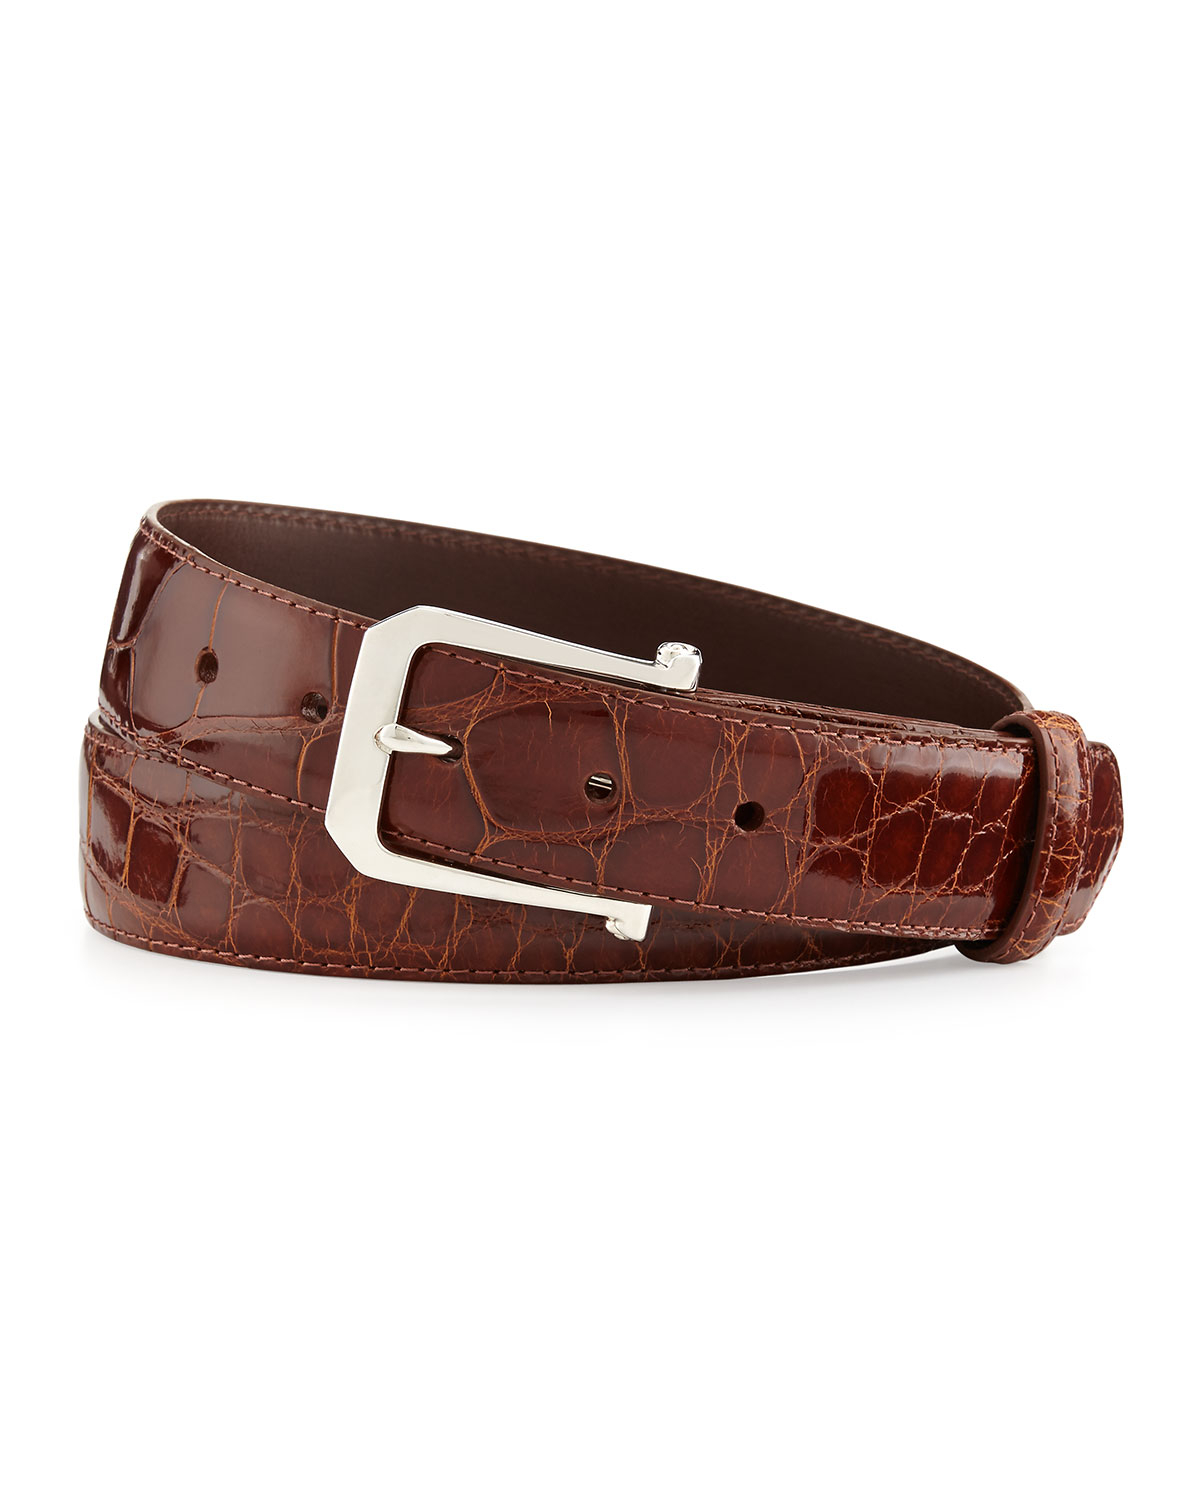 Lyst - W. Kleinberg Glazed Alligator Belt With The Paisley Buckle in ...